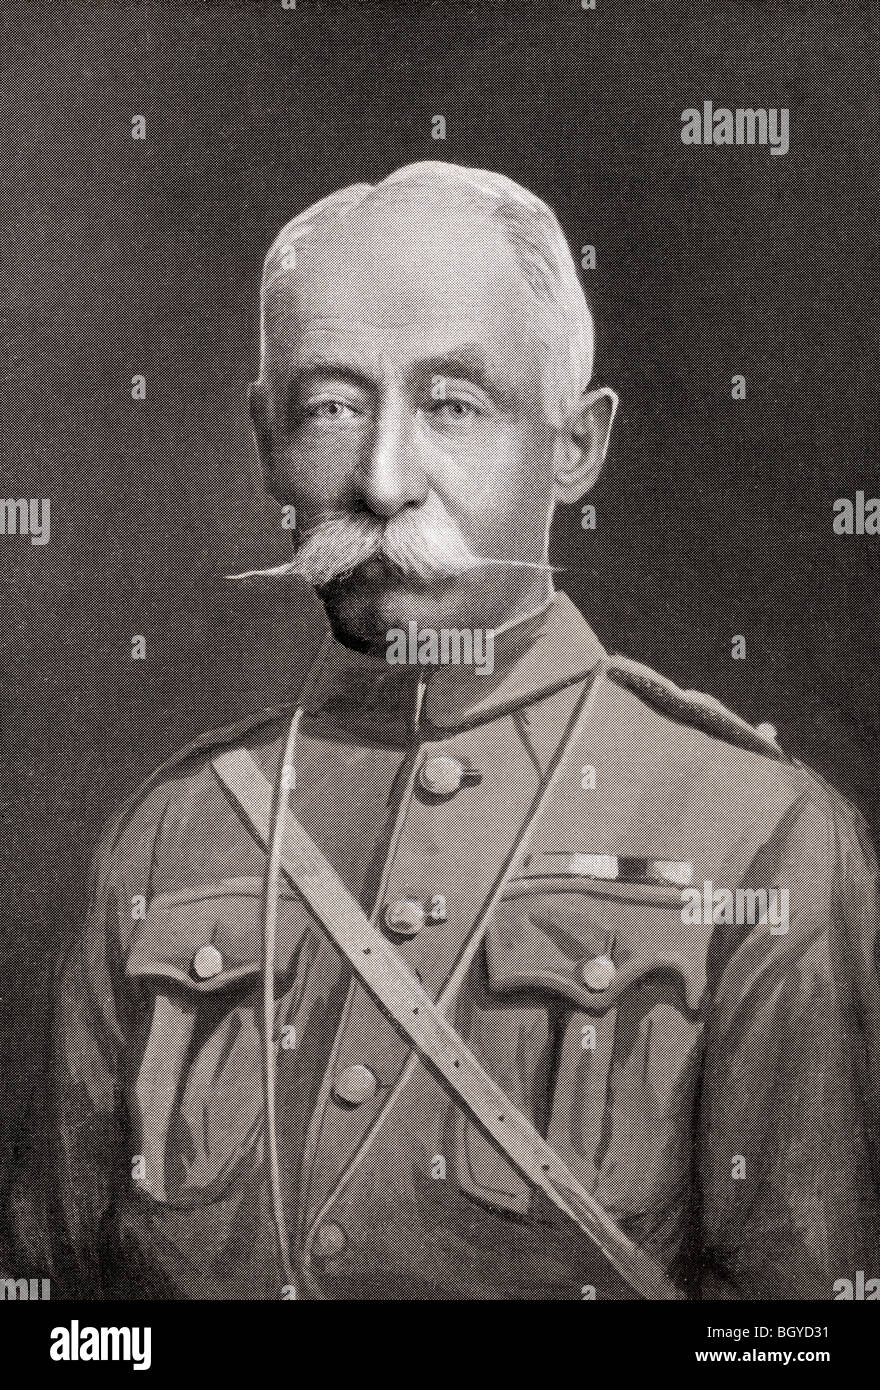 Major-General Sir Edward Yewd Brabant, born 1839. South African colonial military commander. Stock Photo